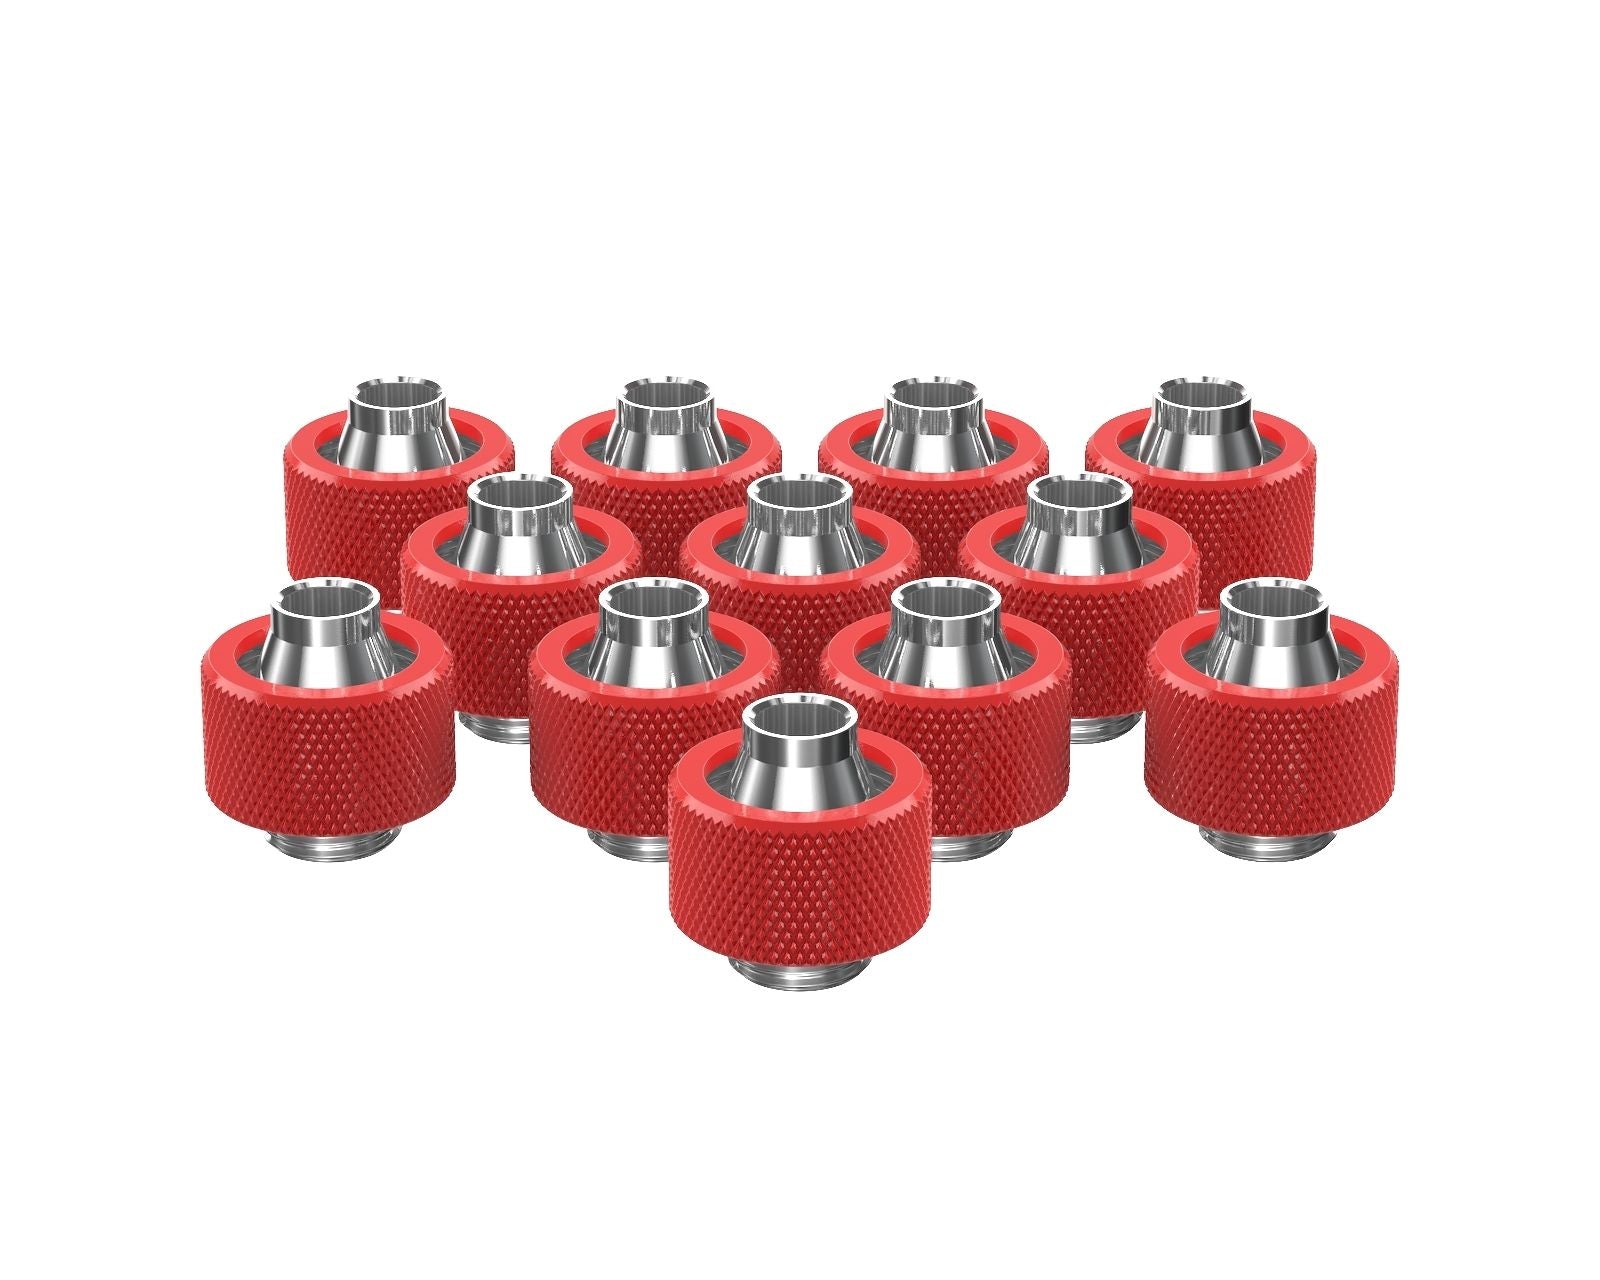 PrimoChill SecureFit SX - Premium Compression Fitting For 3/8in ID x 5/8in OD Flexible Tubing 12 Pack (F-SFSX58-12) - Available in 20+ Colors, Custom Watercooling Loop Ready - Razor Red